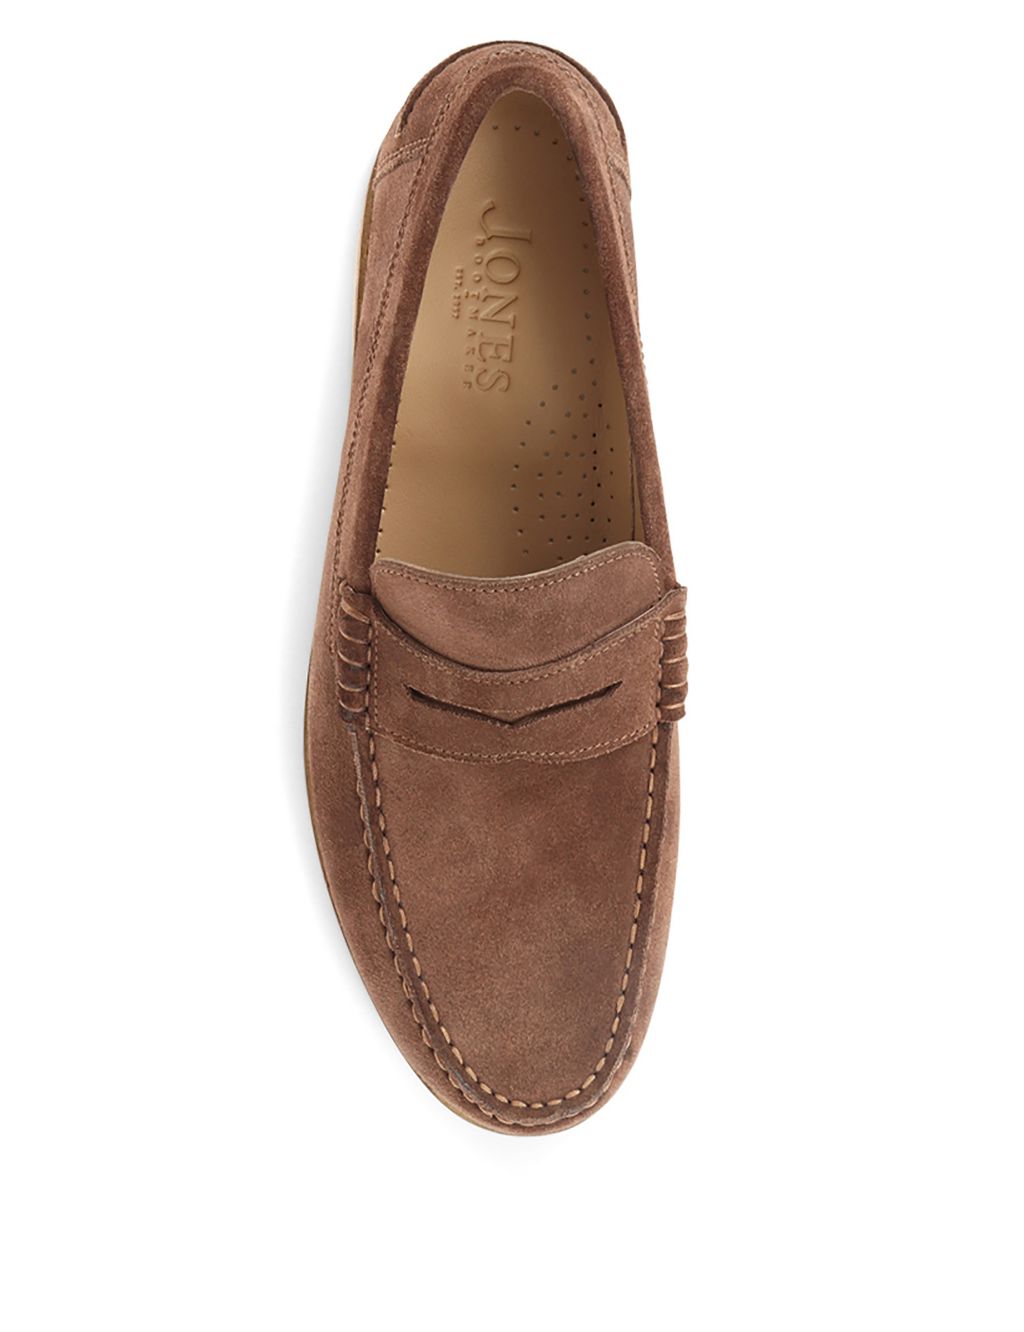 Leather Slip-On Loafers image 5